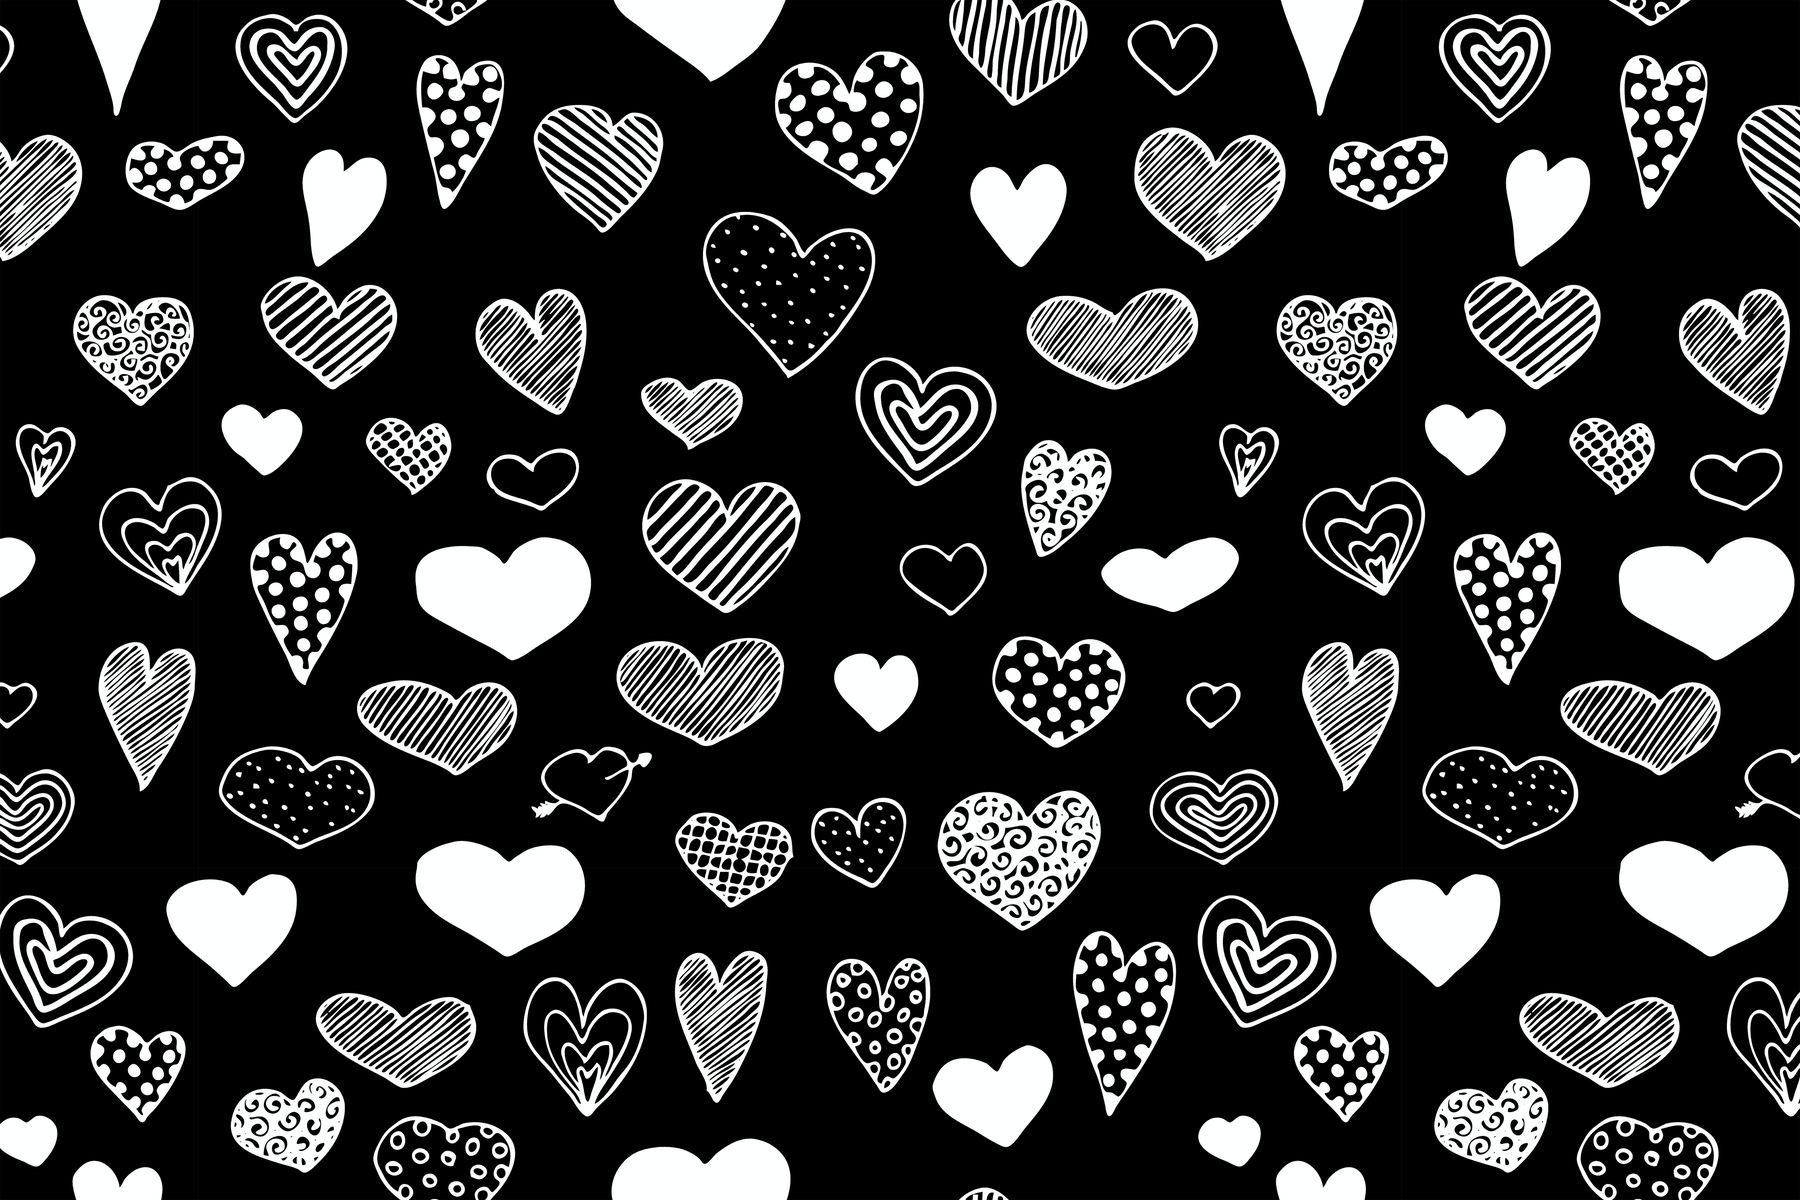 Heart Doodles Black and White wallpaper - Happywall